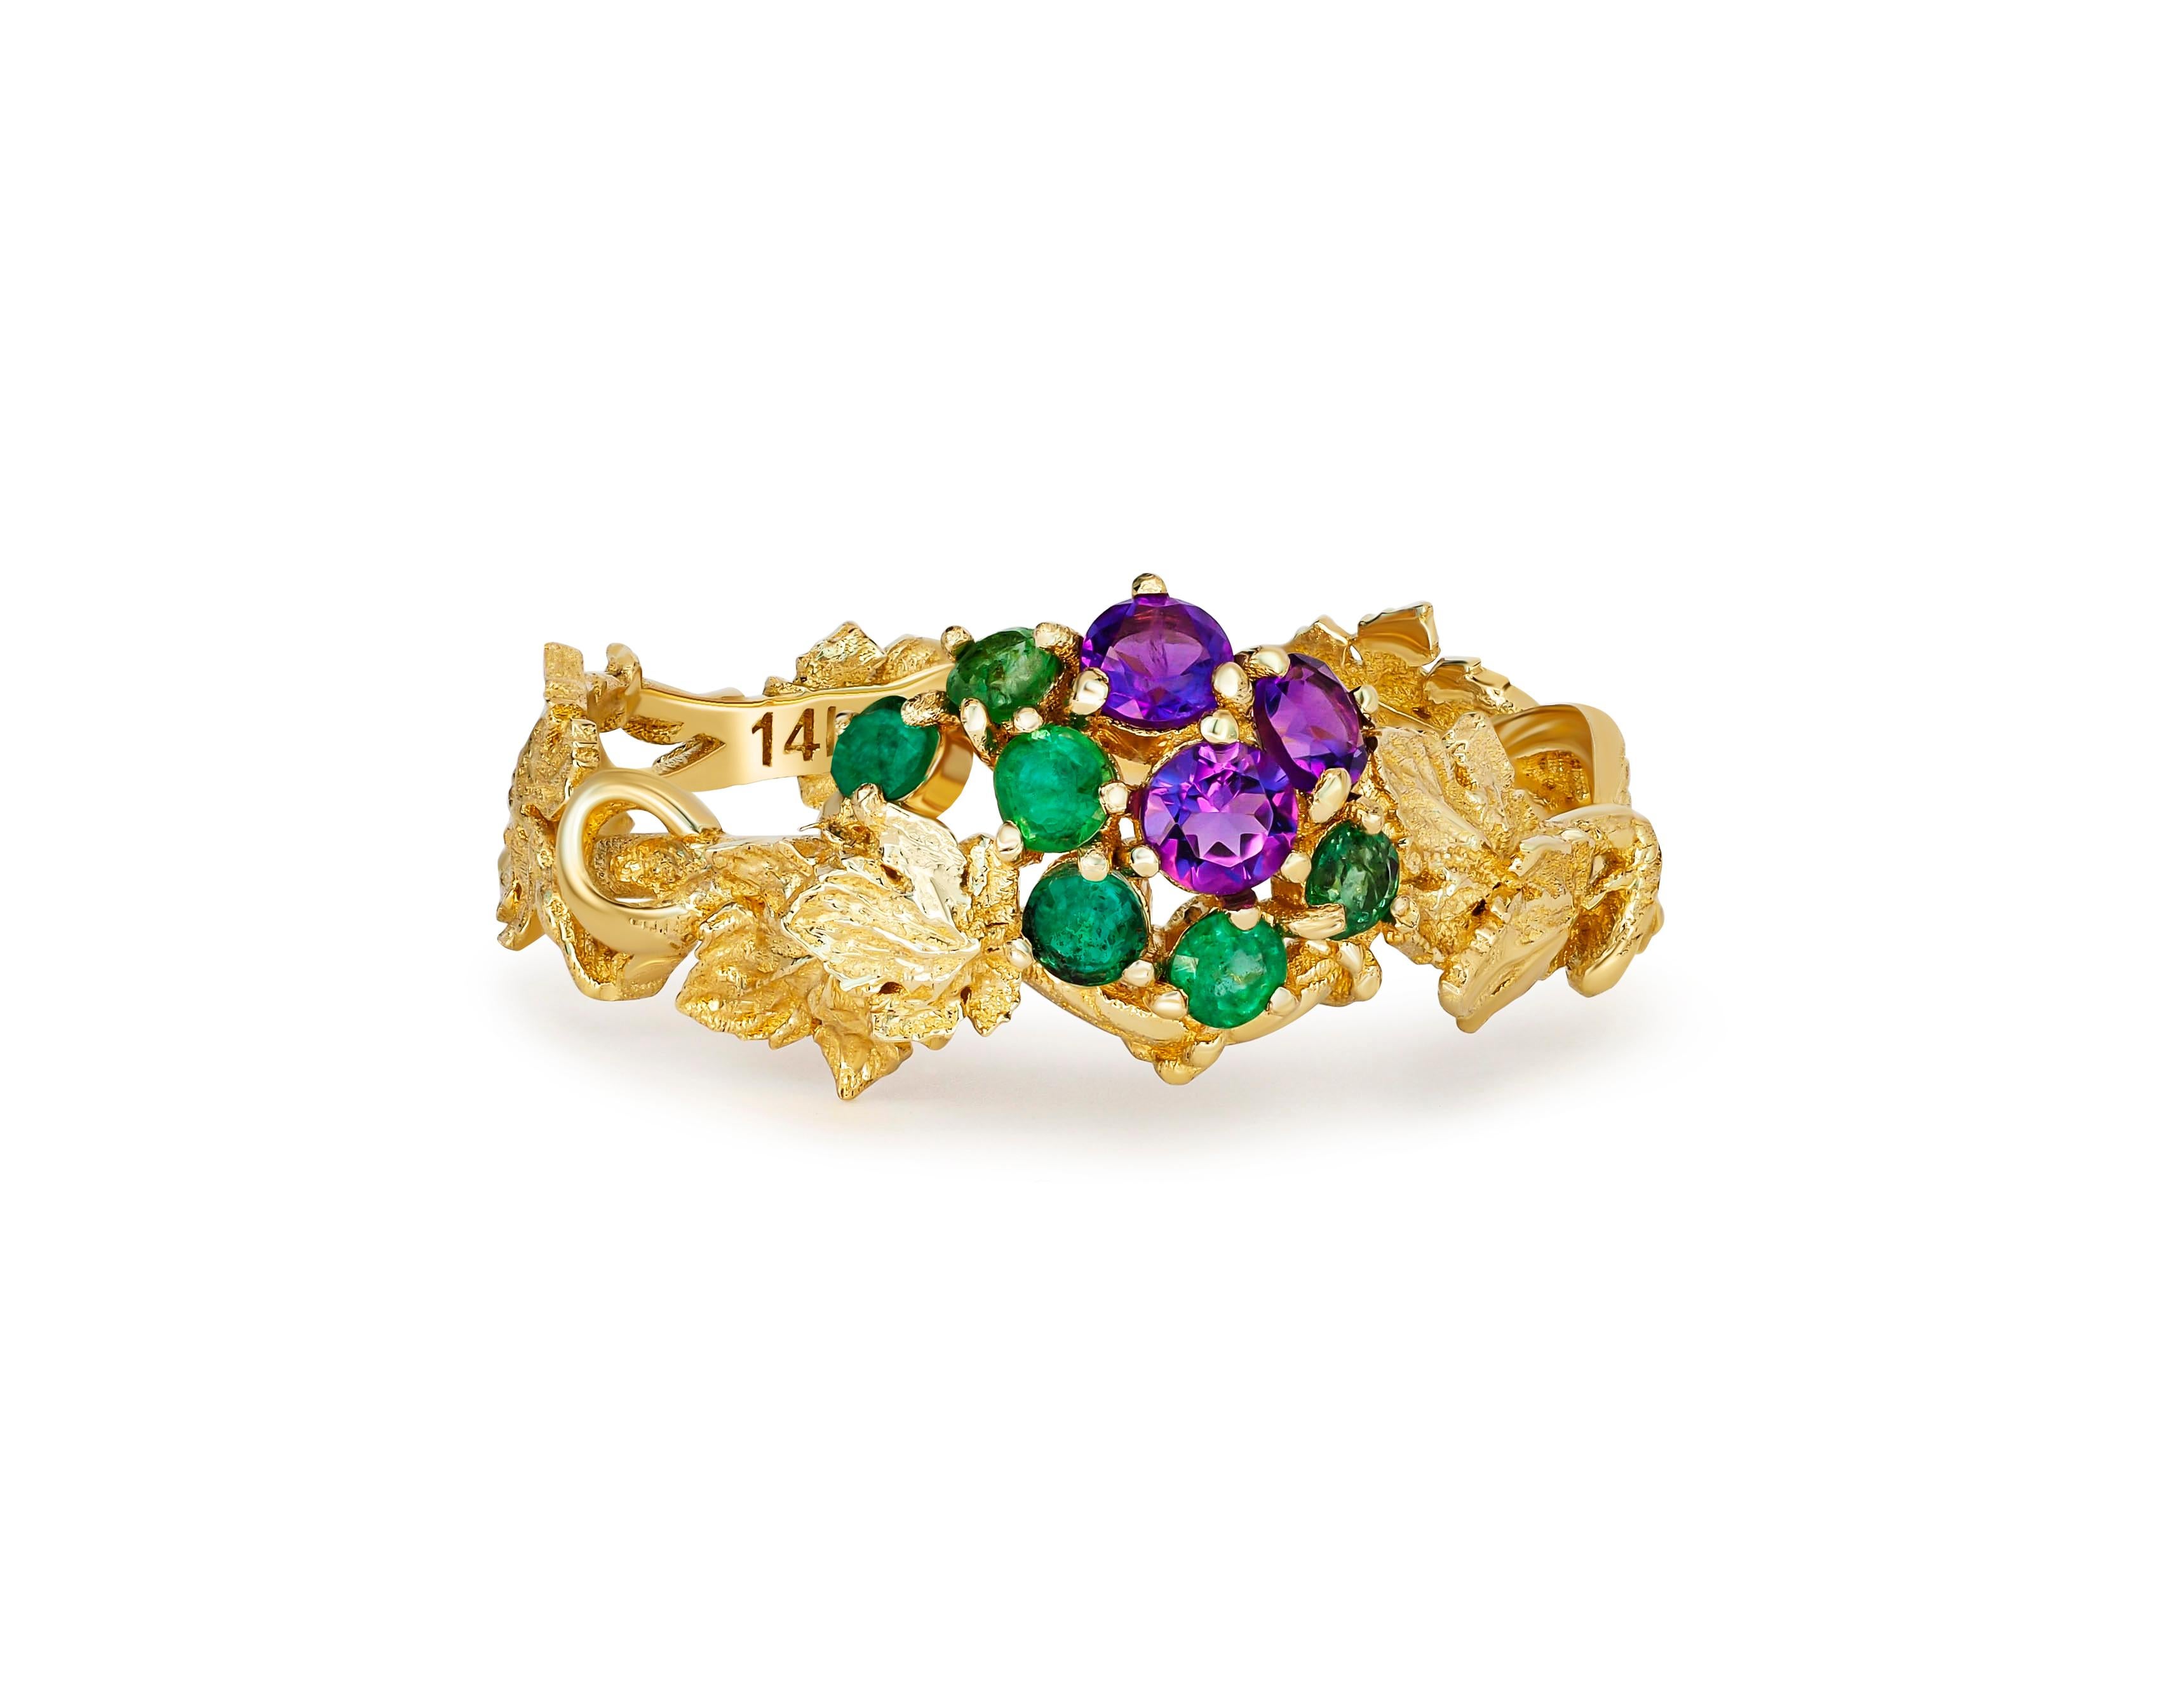 Grape ring with emeralds, amethysts in 14k gold. 
Vine Leaves Ring. Fertility ring. Summer vine ring. Plant ring. Emeralds, amethysts ring.

Weight: 2 g depends from size
Metal type: 14kt solid gold

1. Natural amethysts:
Round cut, clarity -